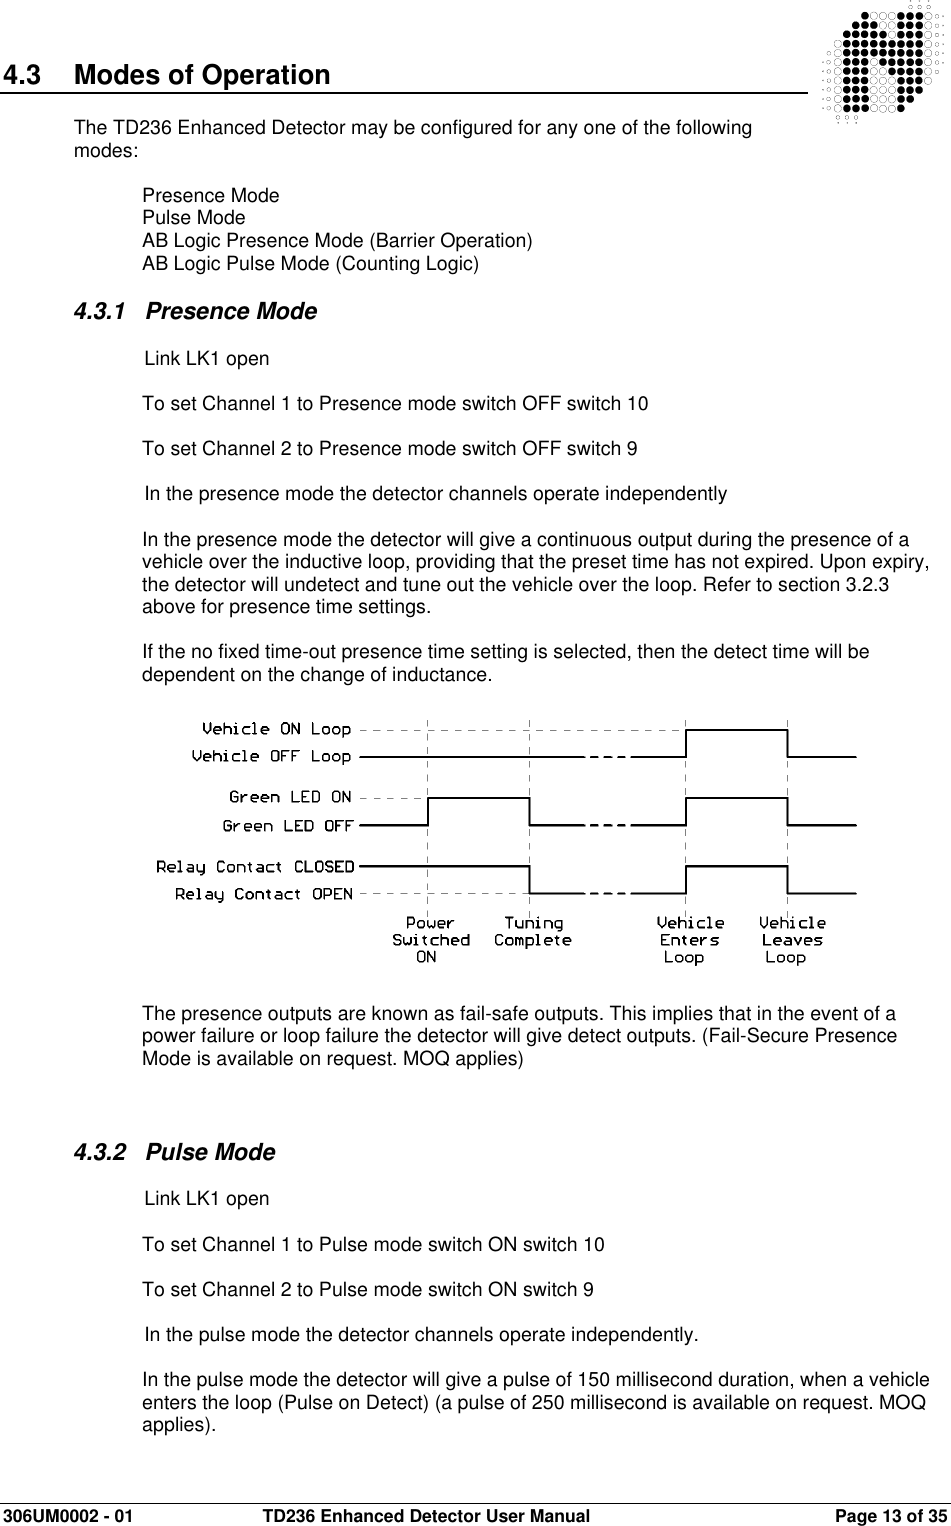  306UM0002 - 01  TD236 Enhanced Detector User Manual   Page 13 of 35  4.3  Modes of Operation  The TD236 Enhanced Detector may be configured for any one of the following modes:  Presence Mode Pulse Mode AB Logic Presence Mode (Barrier Operation) AB Logic Pulse Mode (Counting Logic)  4.3.1  Presence Mode    Link LK1 open  To set Channel 1 to Presence mode switch OFF switch 10  To set Channel 2 to Presence mode switch OFF switch 9    In the presence mode the detector channels operate independently  In the presence mode the detector will give a continuous output during the presence of a vehicle over the inductive loop, providing that the preset time has not expired. Upon expiry, the detector will undetect and tune out the vehicle over the loop. Refer to section 3.2.3 above for presence time settings.  If the no fixed time-out presence time setting is selected, then the detect time will be dependent on the change of inductance.                The presence outputs are known as fail-safe outputs. This implies that in the event of a power failure or loop failure the detector will give detect outputs. (Fail-Secure Presence Mode is available on request. MOQ applies)    4.3.2  Pulse Mode    Link LK1 open  To set Channel 1 to Pulse mode switch ON switch 10  To set Channel 2 to Pulse mode switch ON switch 9    In the pulse mode the detector channels operate independently.  In the pulse mode the detector will give a pulse of 150 millisecond duration, when a vehicle enters the loop (Pulse on Detect) (a pulse of 250 millisecond is available on request. MOQ applies). 